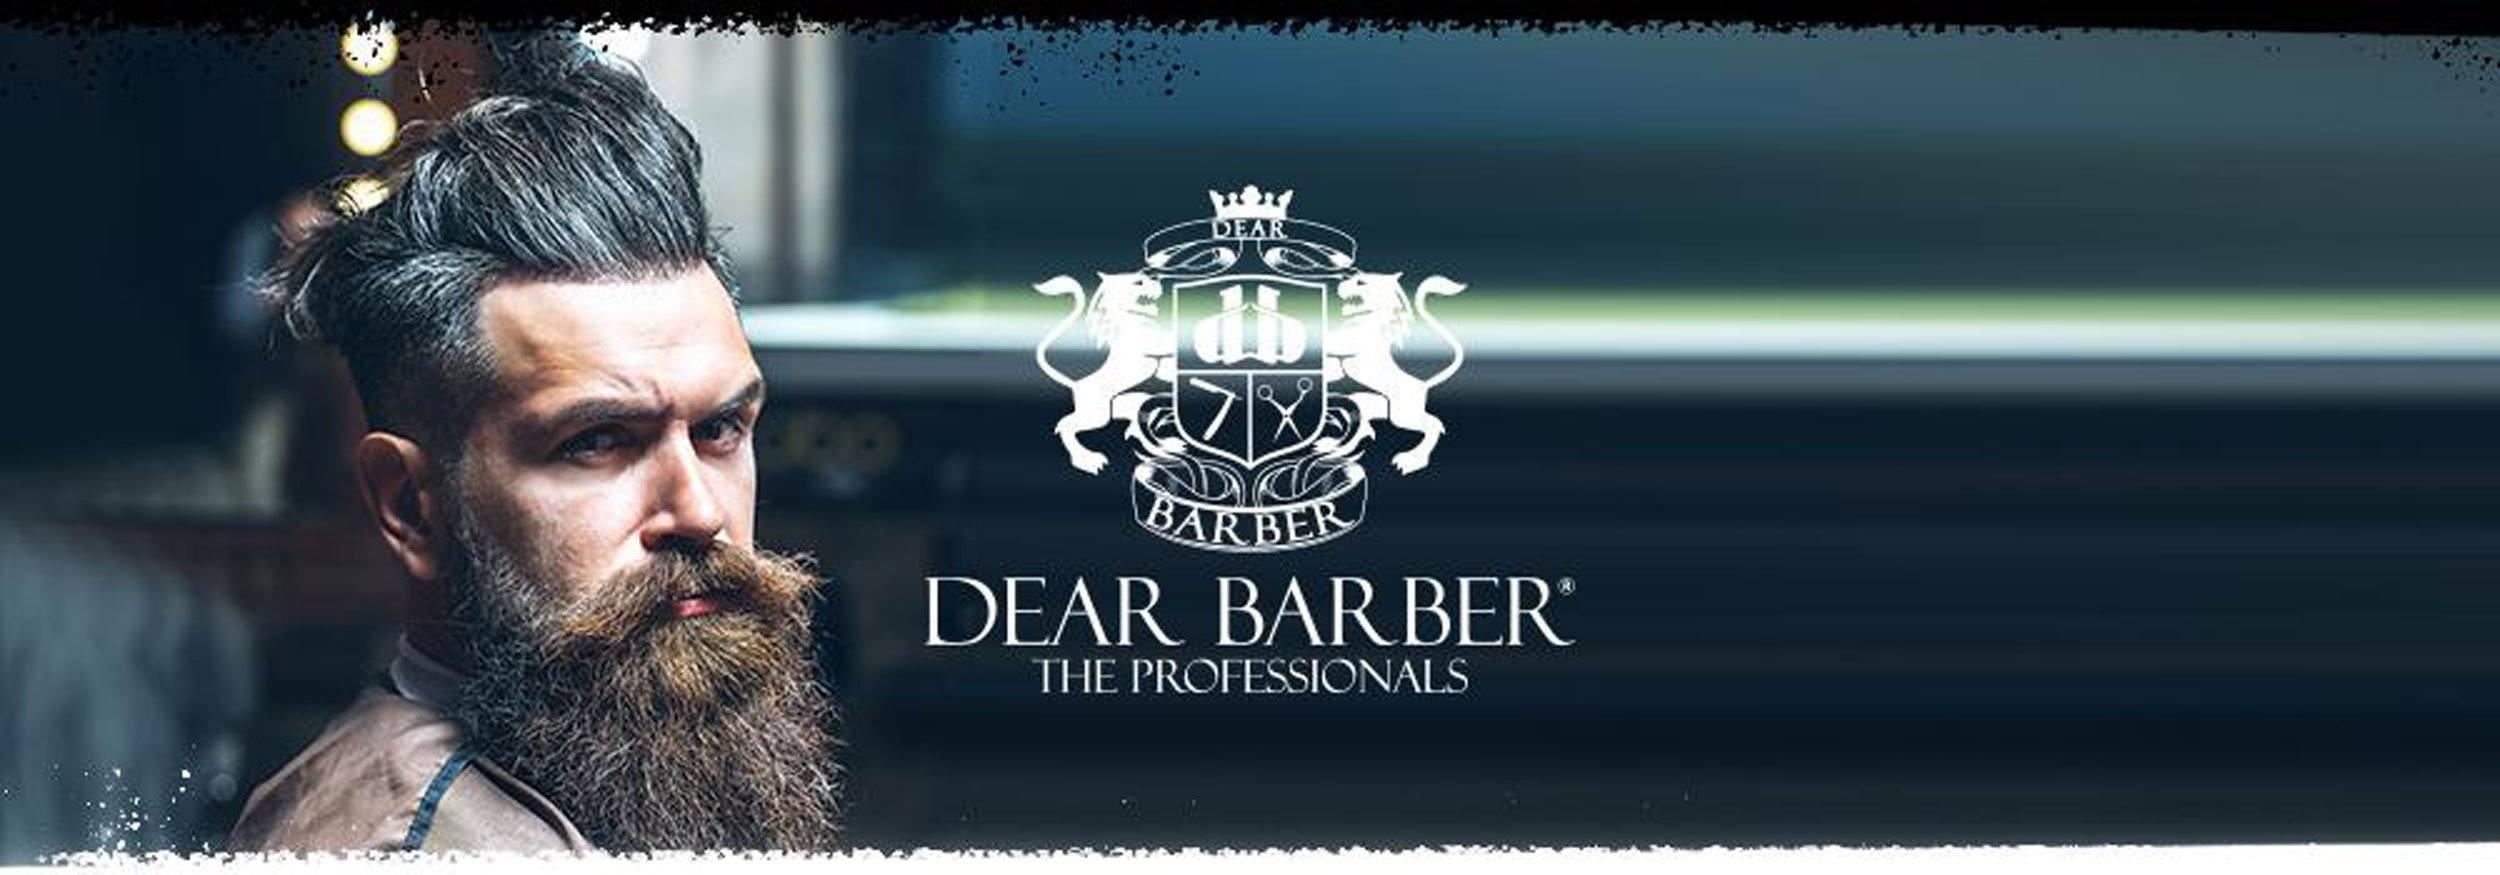 Dear Barber - The Professionals (sale) - TacNGear